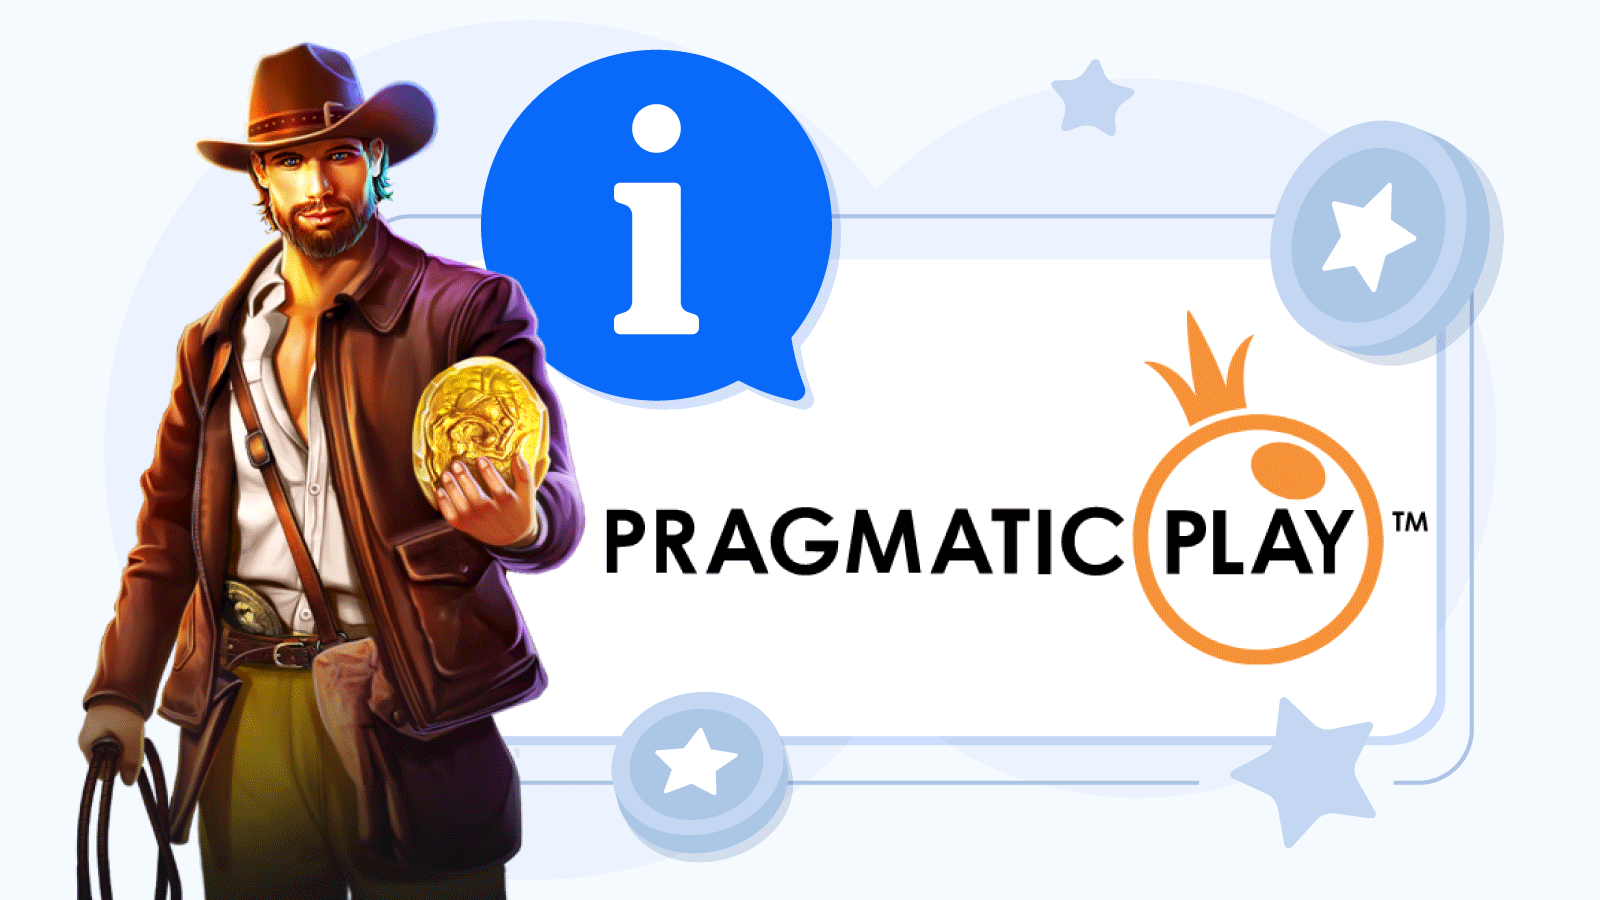 Insights on Pragmatic Play’s Background